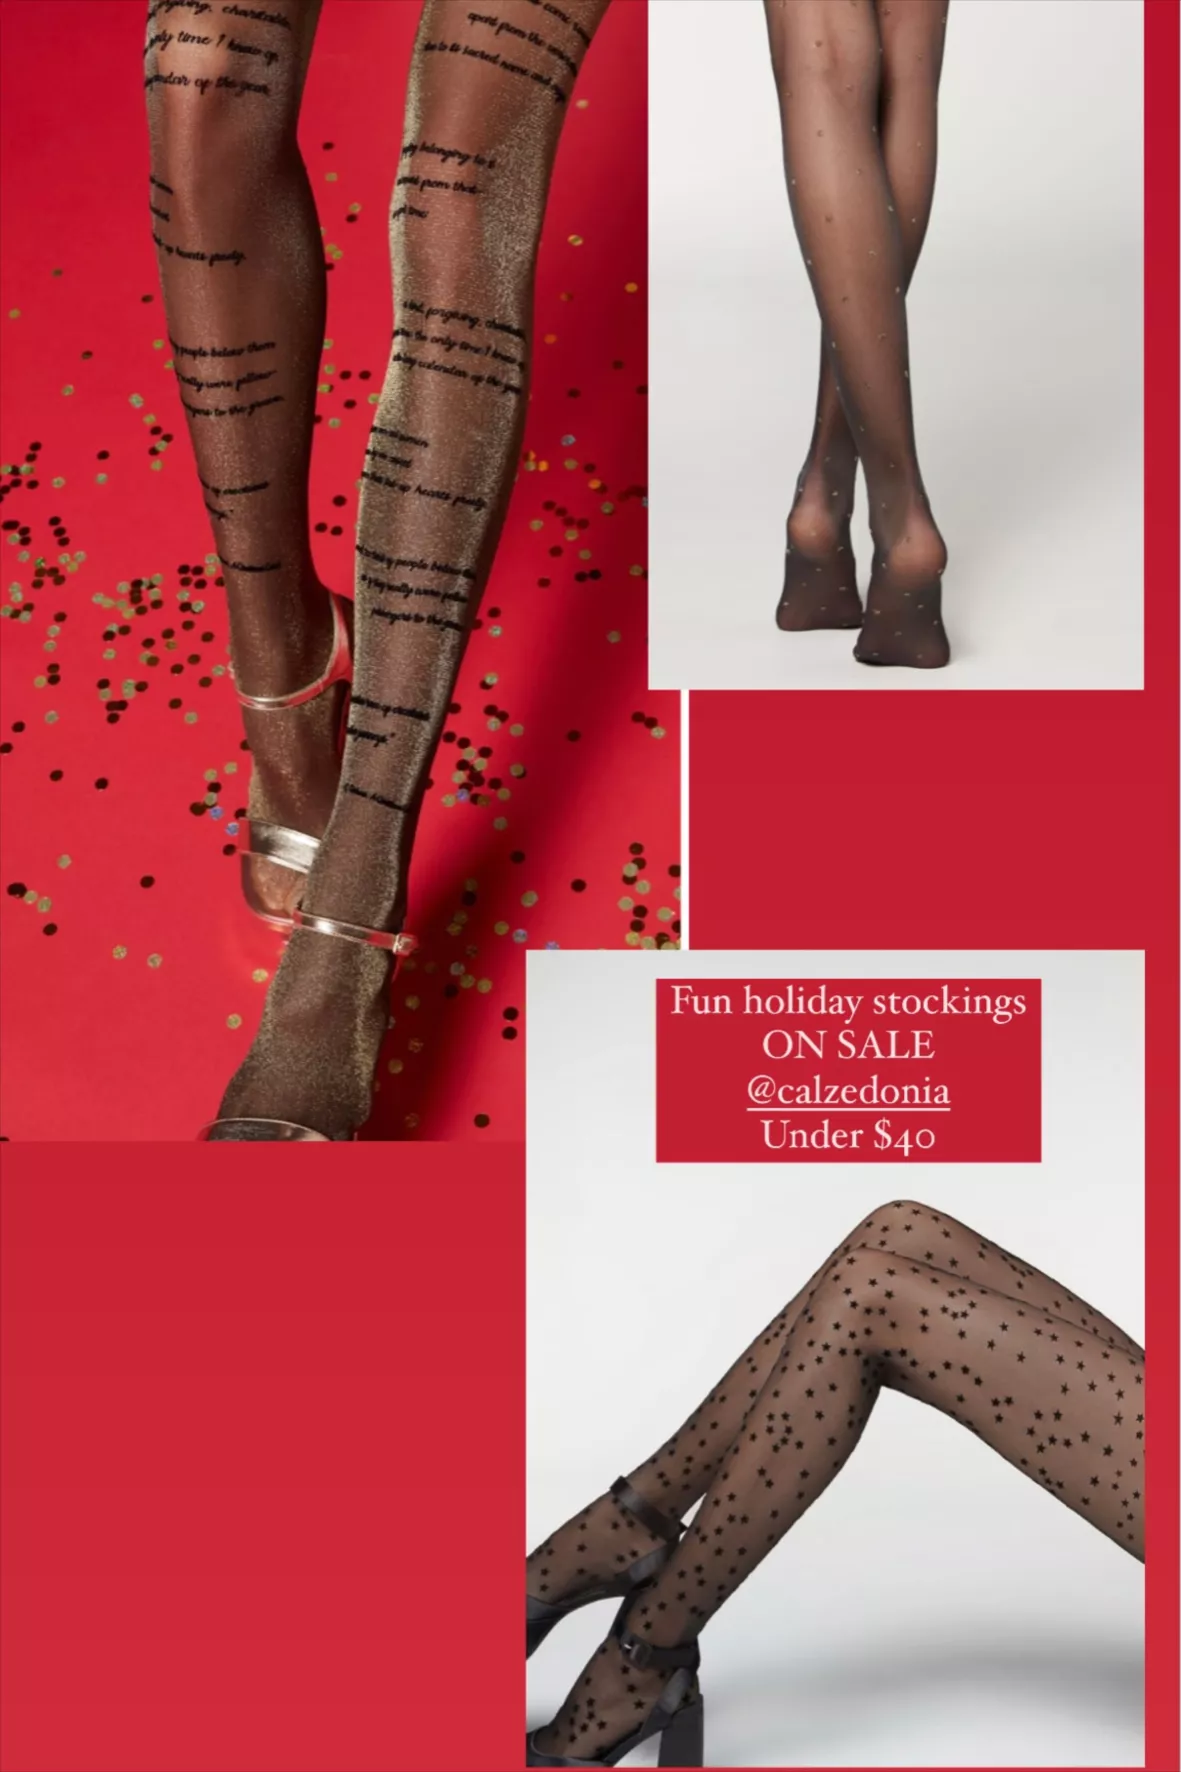 Buy Women's Tights and Stockings on Calzedonia